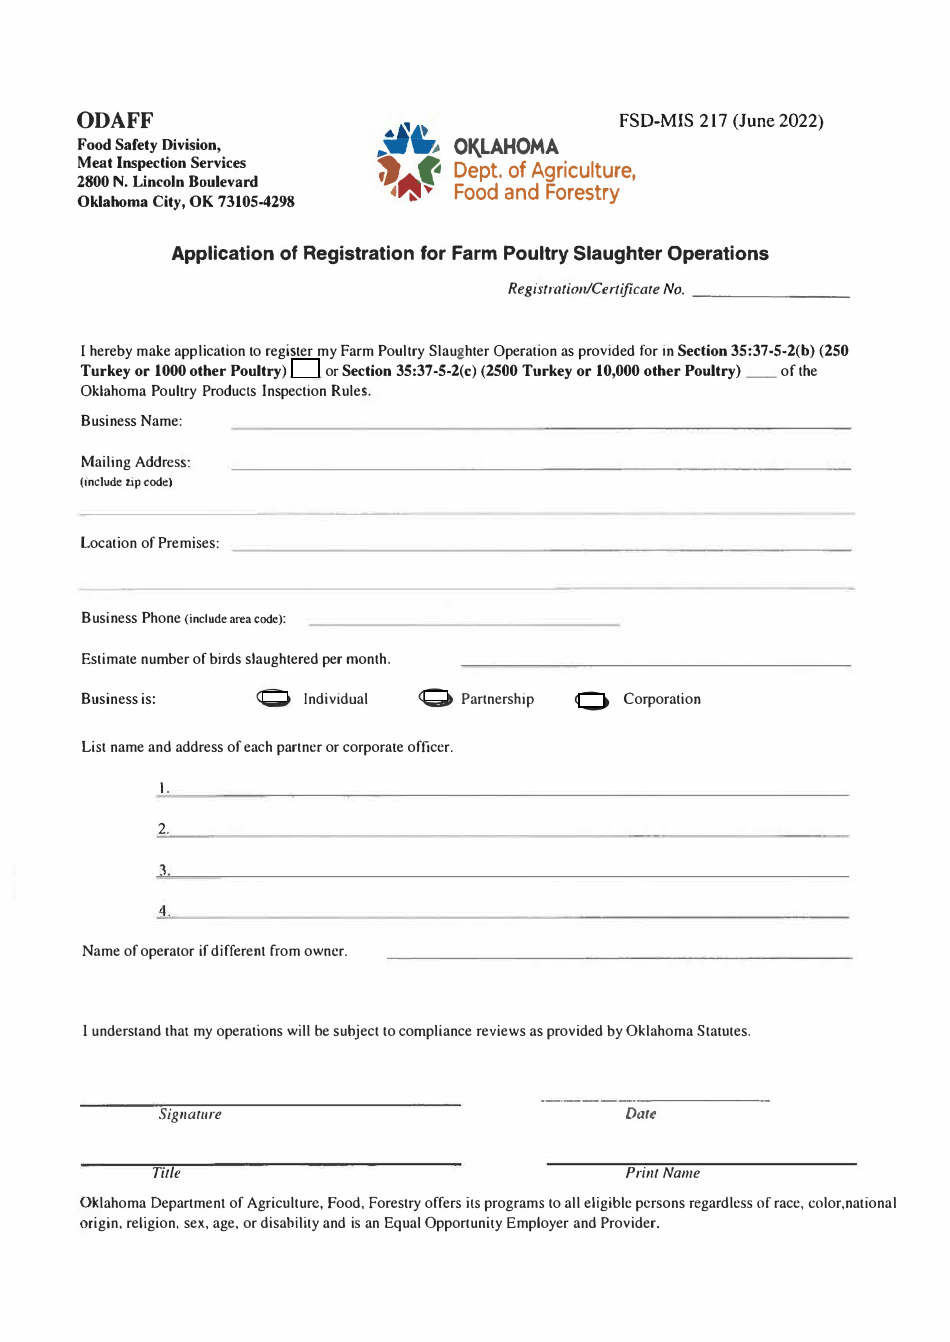 Form FSD-MIS217 Application of Registration for Farm Poultry Slaughter Operations - Oklahoma, Page 1